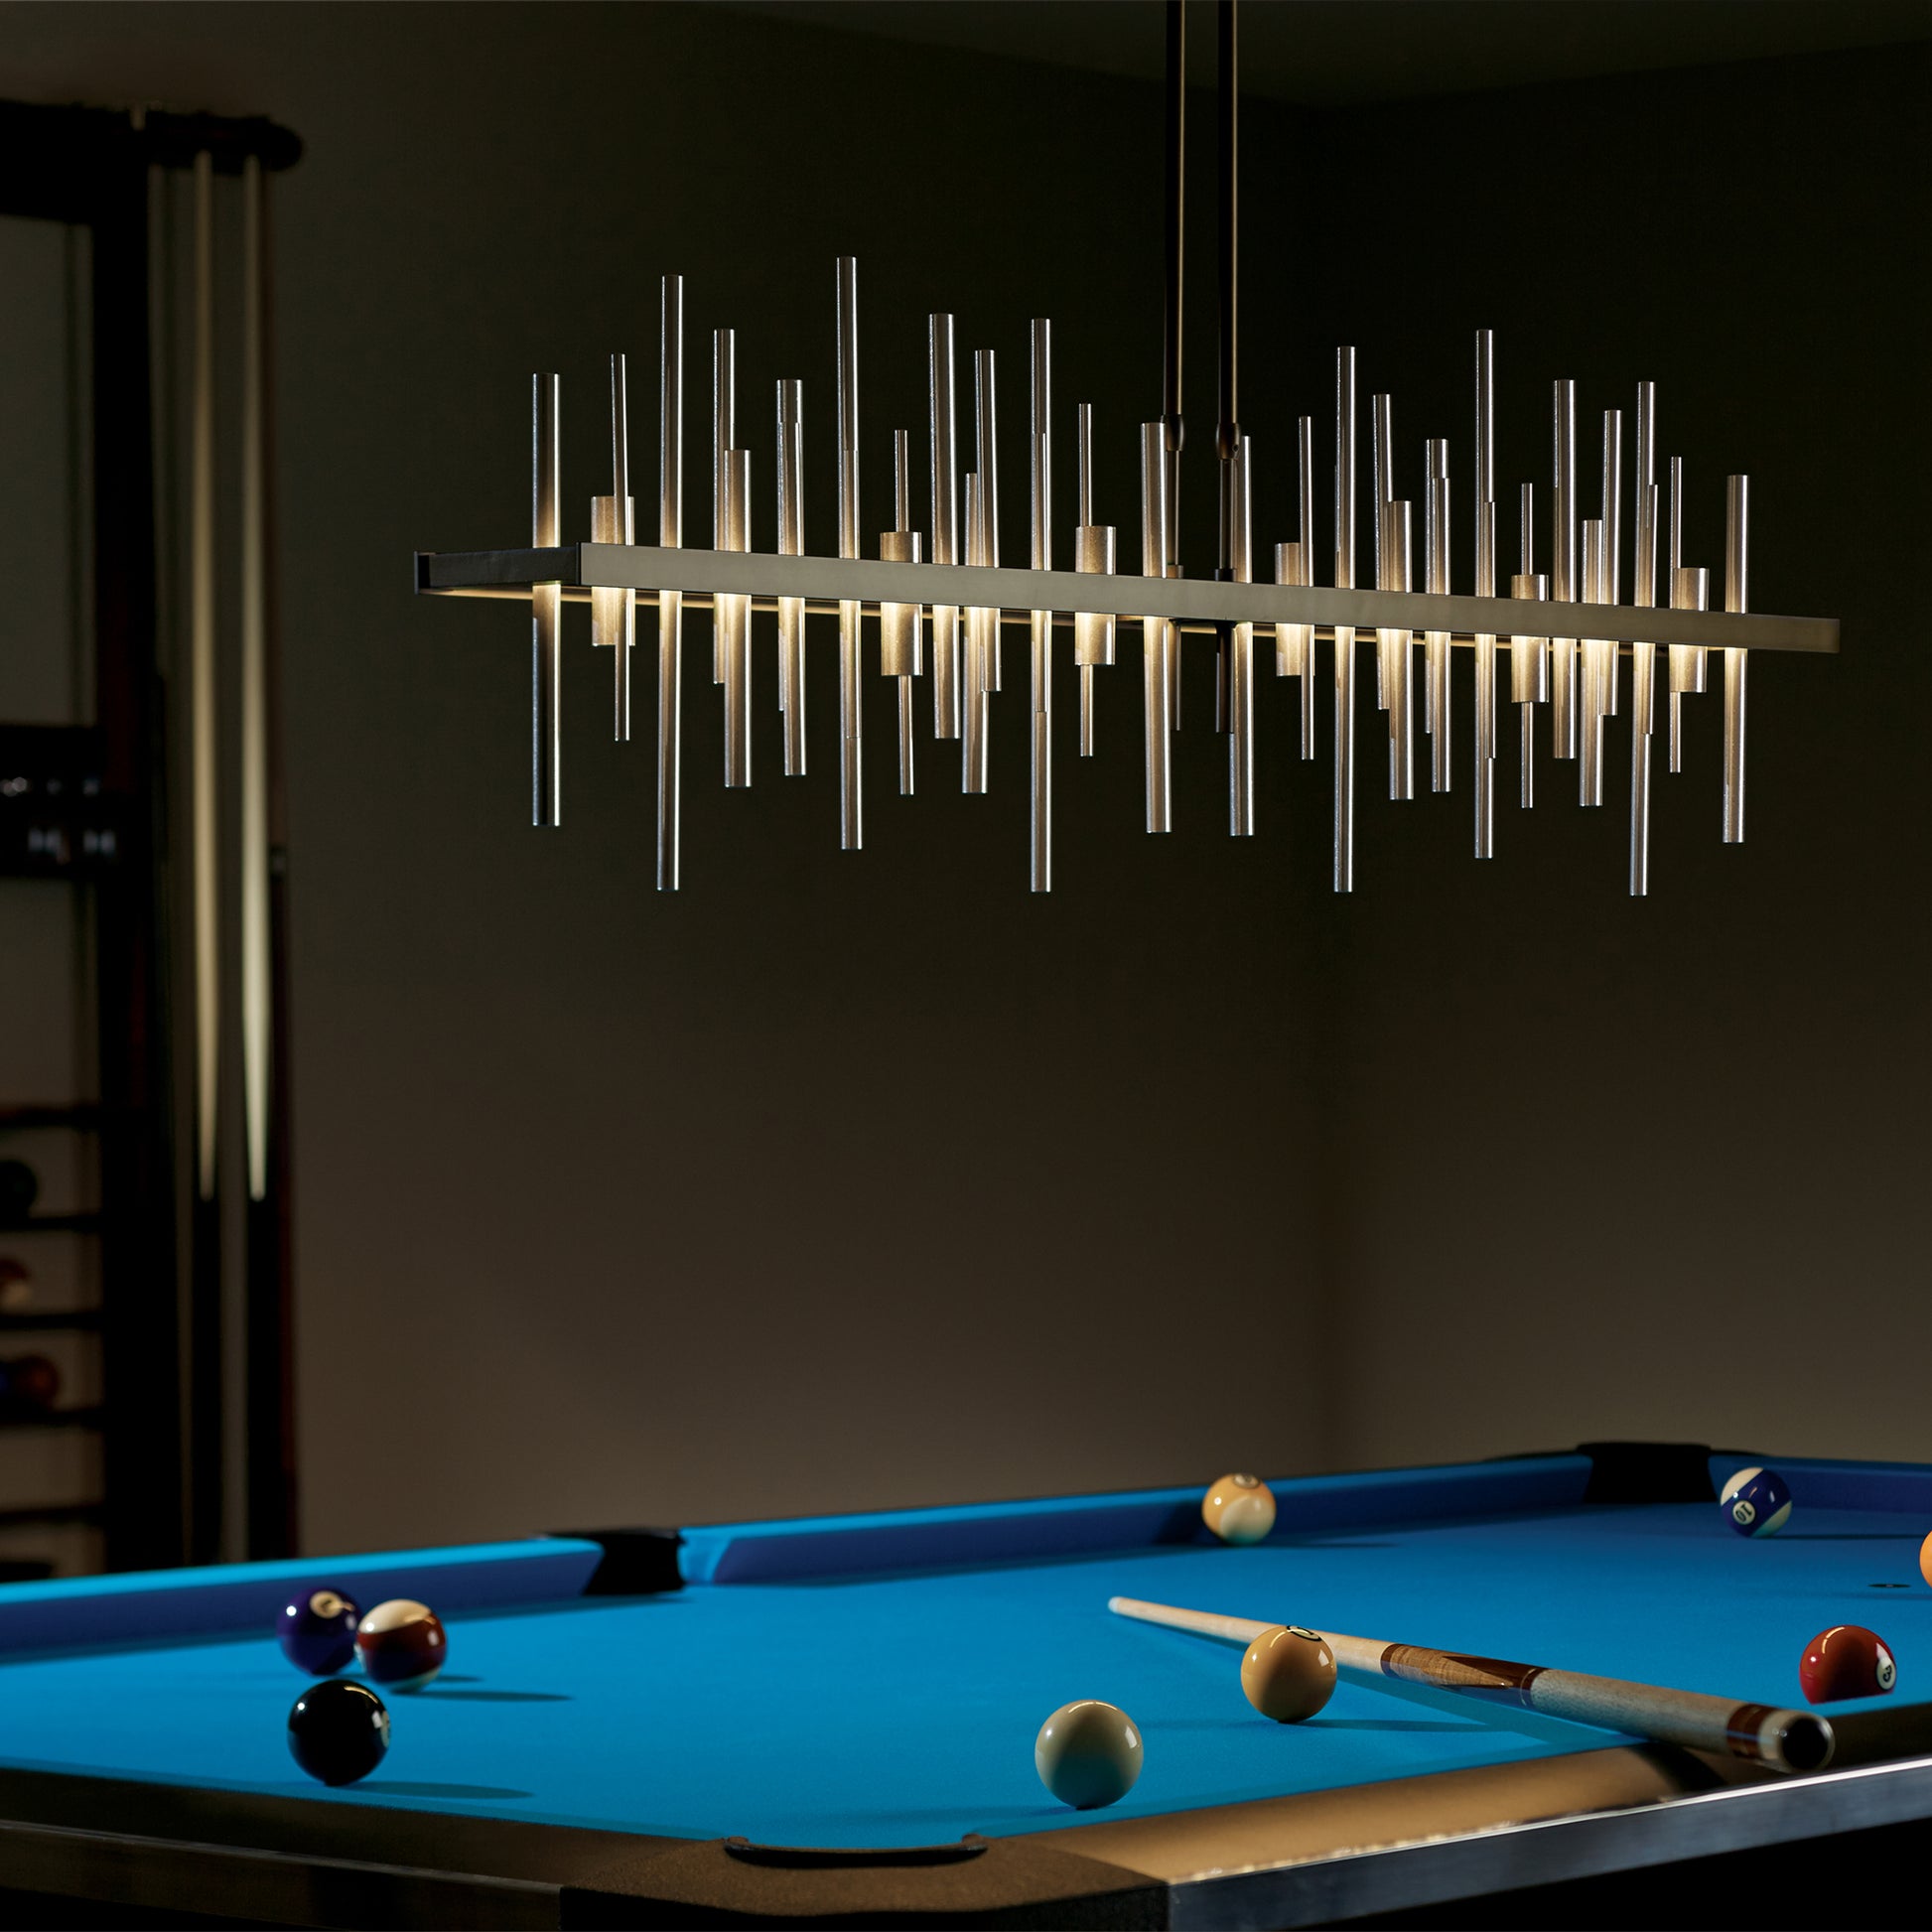 In a dark room, a pool table is illuminated by the warm glow of the Hubbardton Forge's Cityscape Large LED Pendant. The sleek and modern design adds an urban panorama feel to the space.